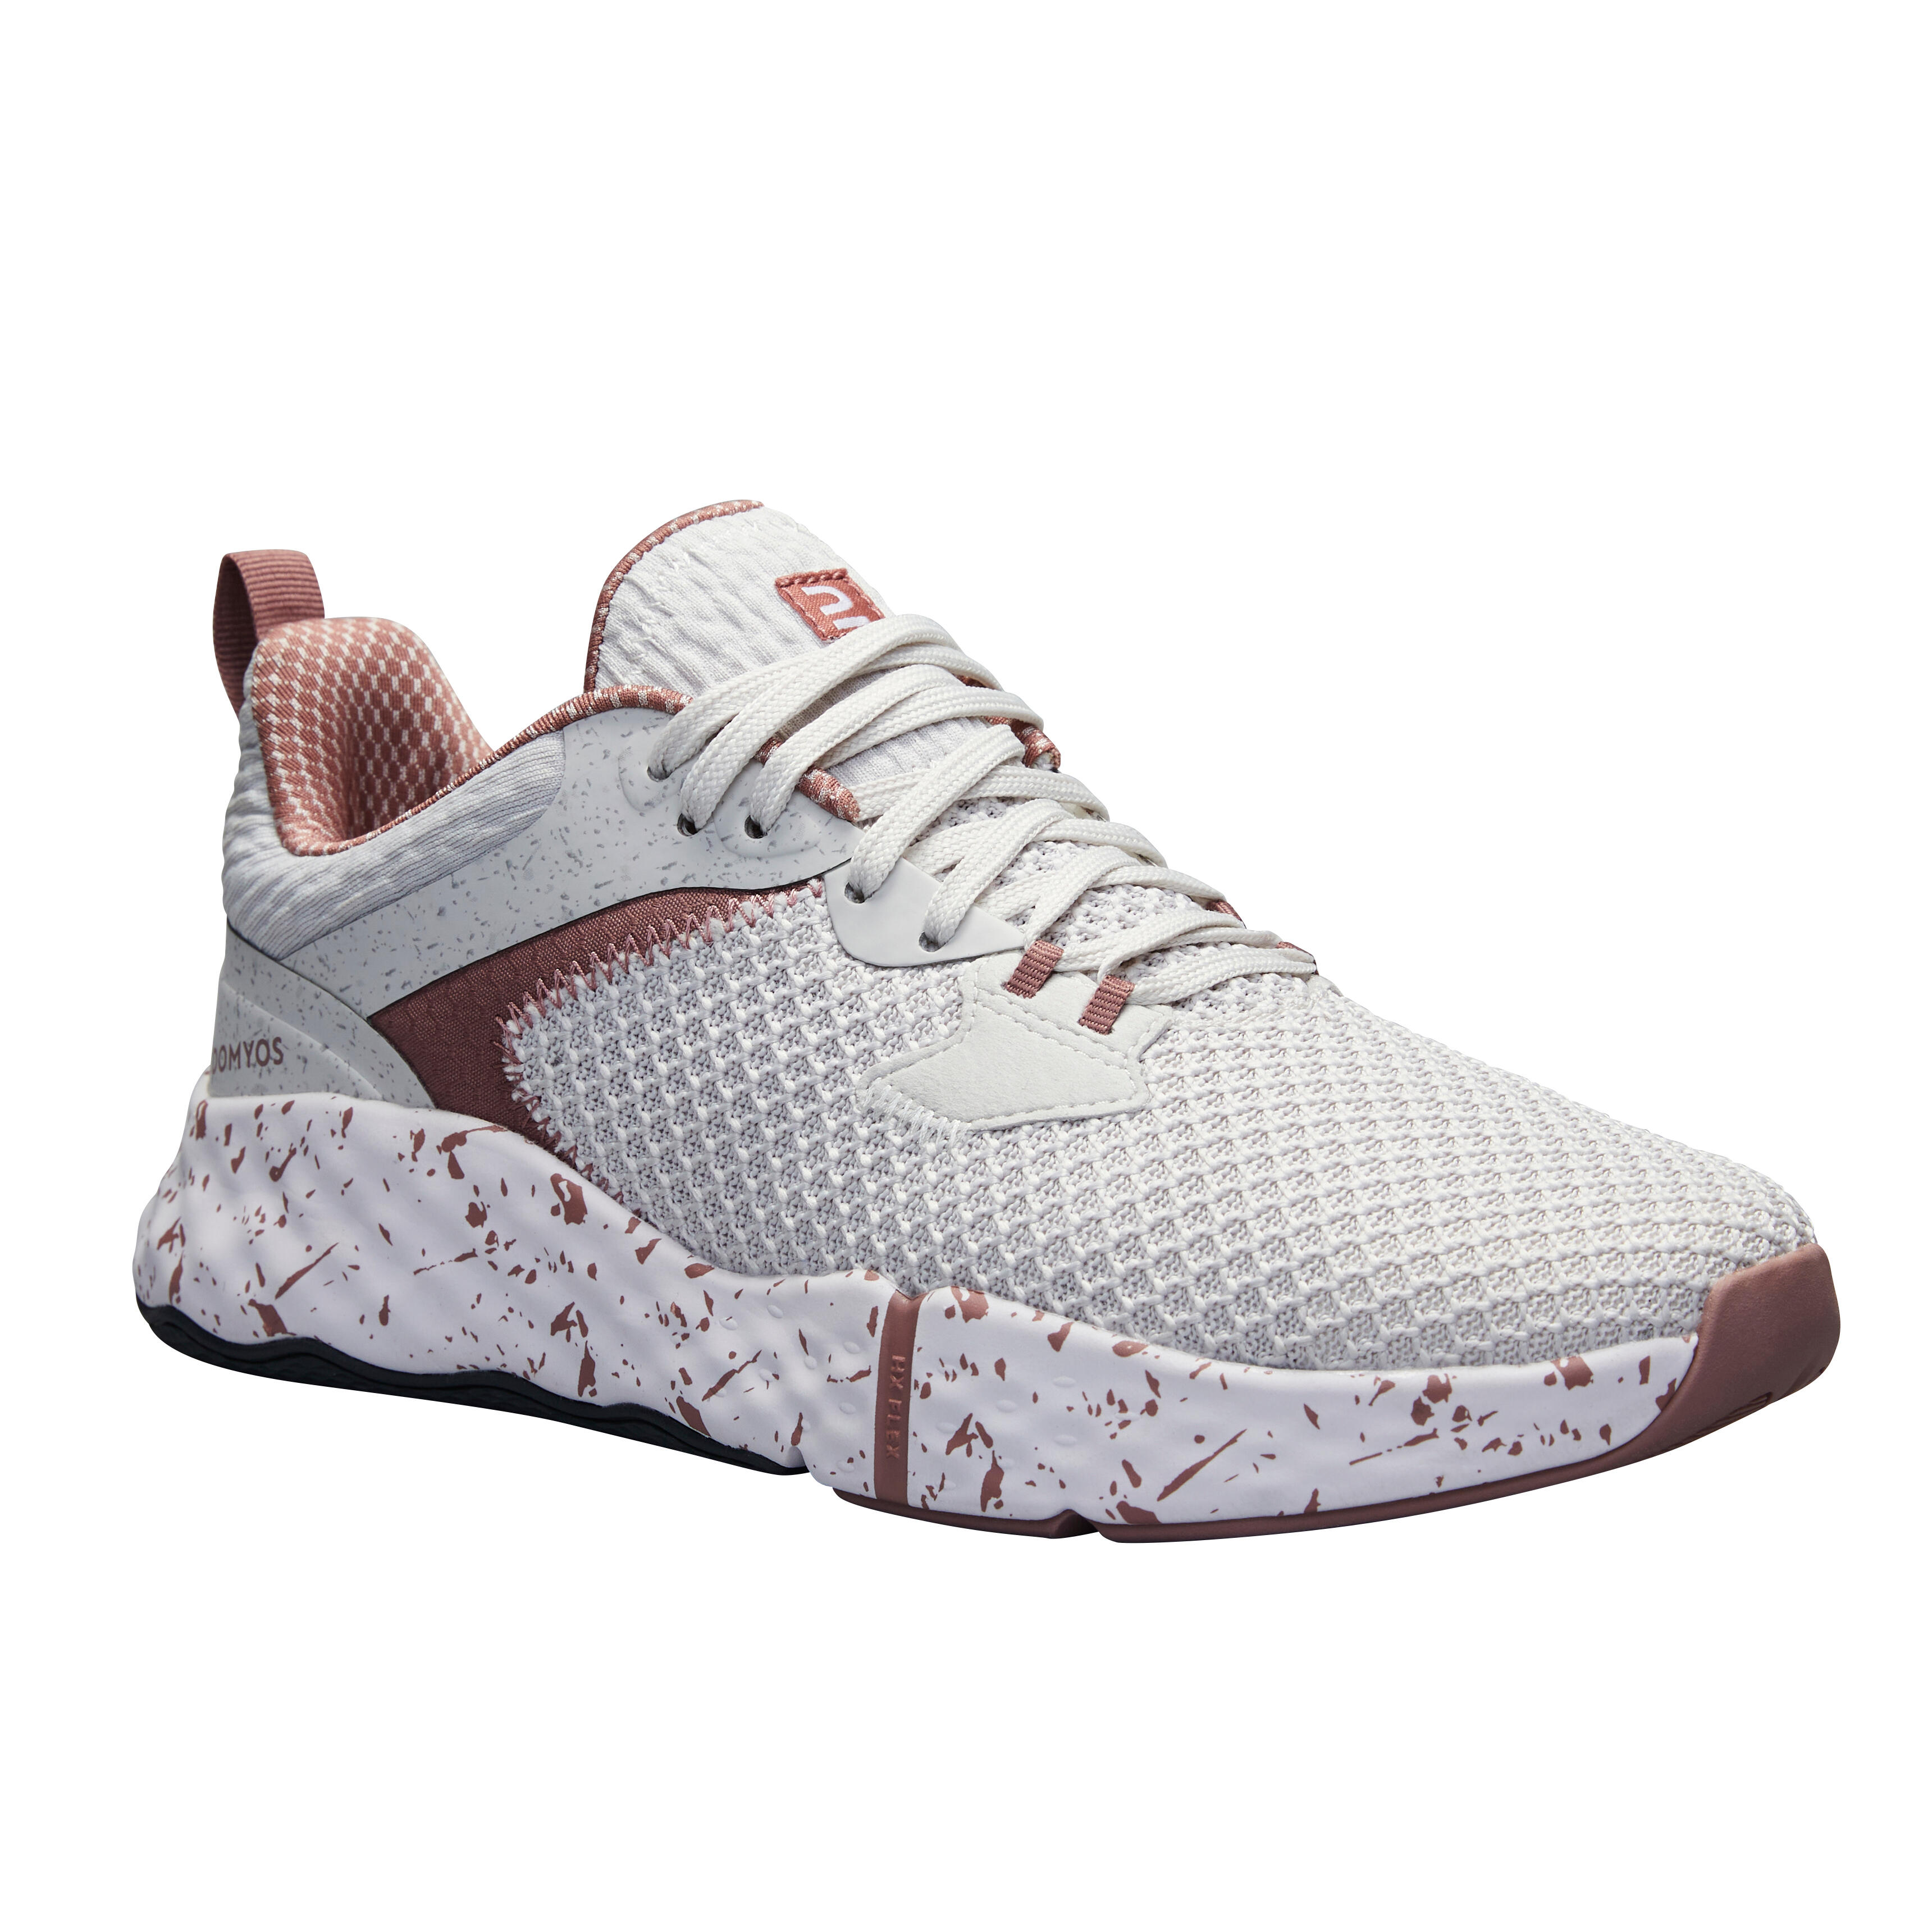 chaussures de fitness 520 femme blanches et roses - domyos